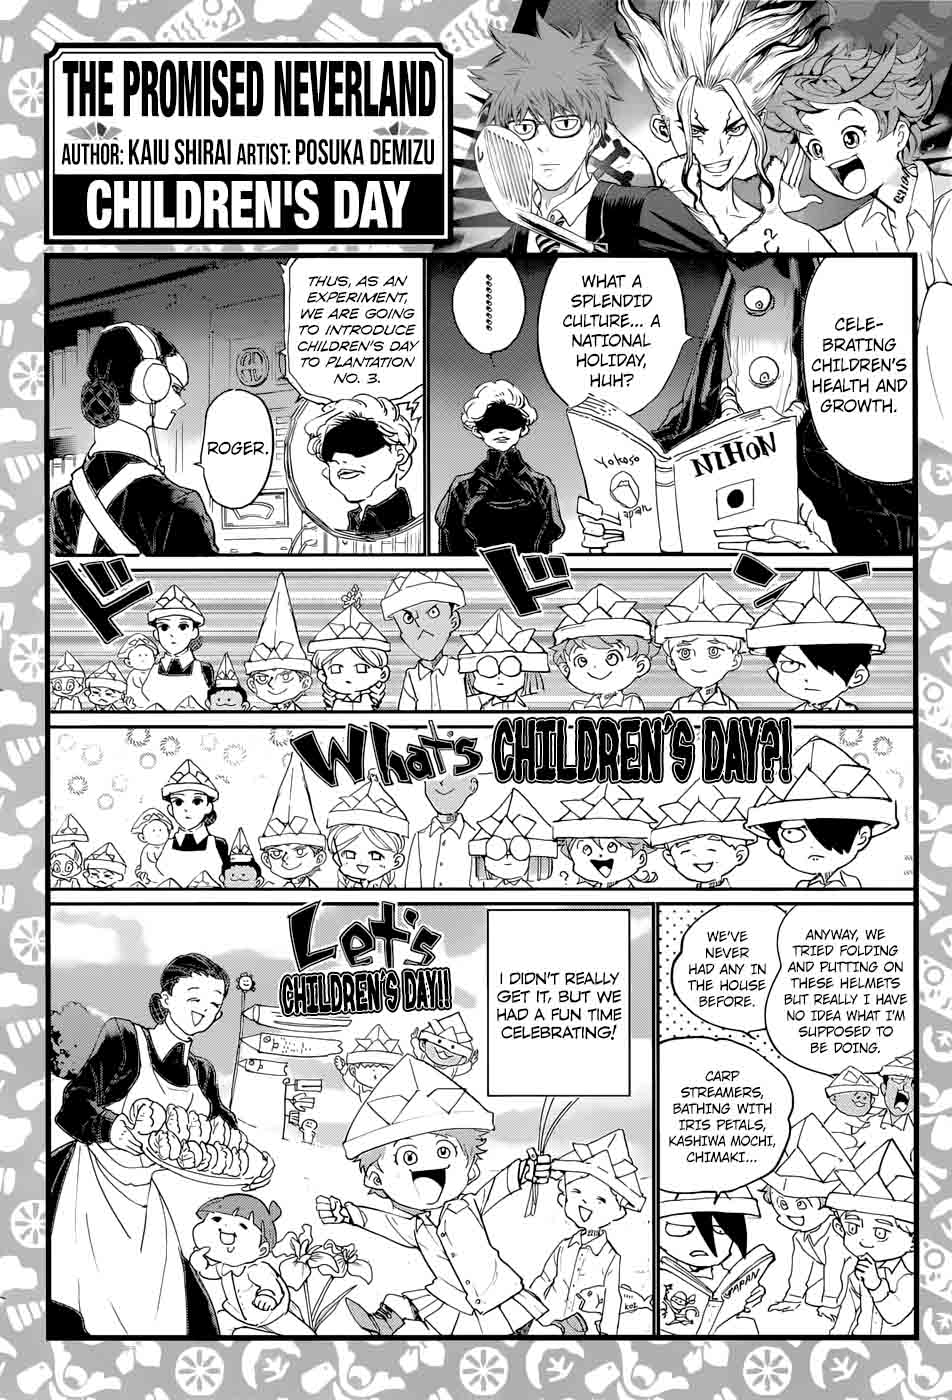 The Promised Neverland 36 19